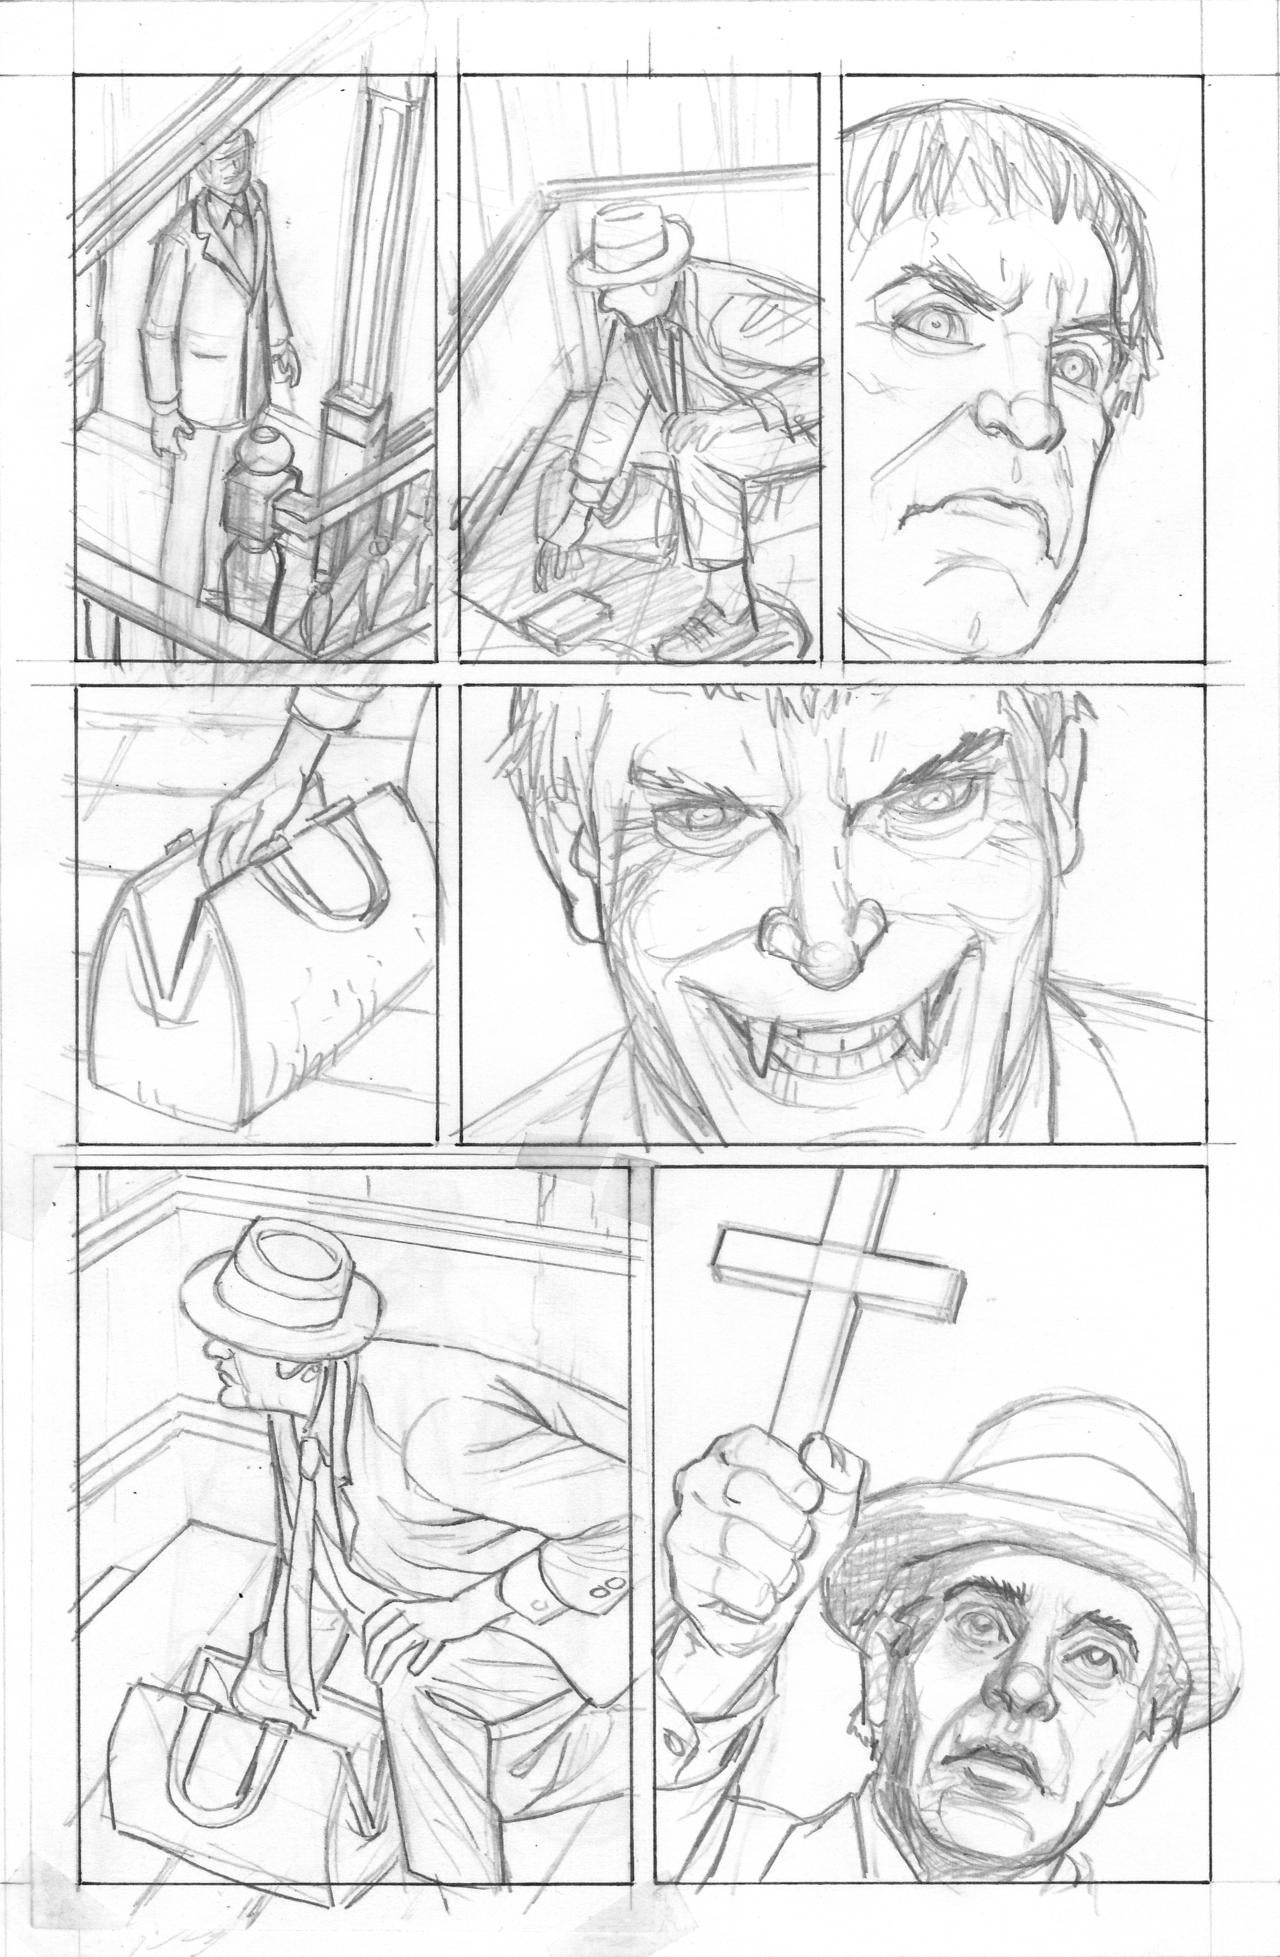 kolchak-interview-with-the-night-stalker-page-3-rough.jpg